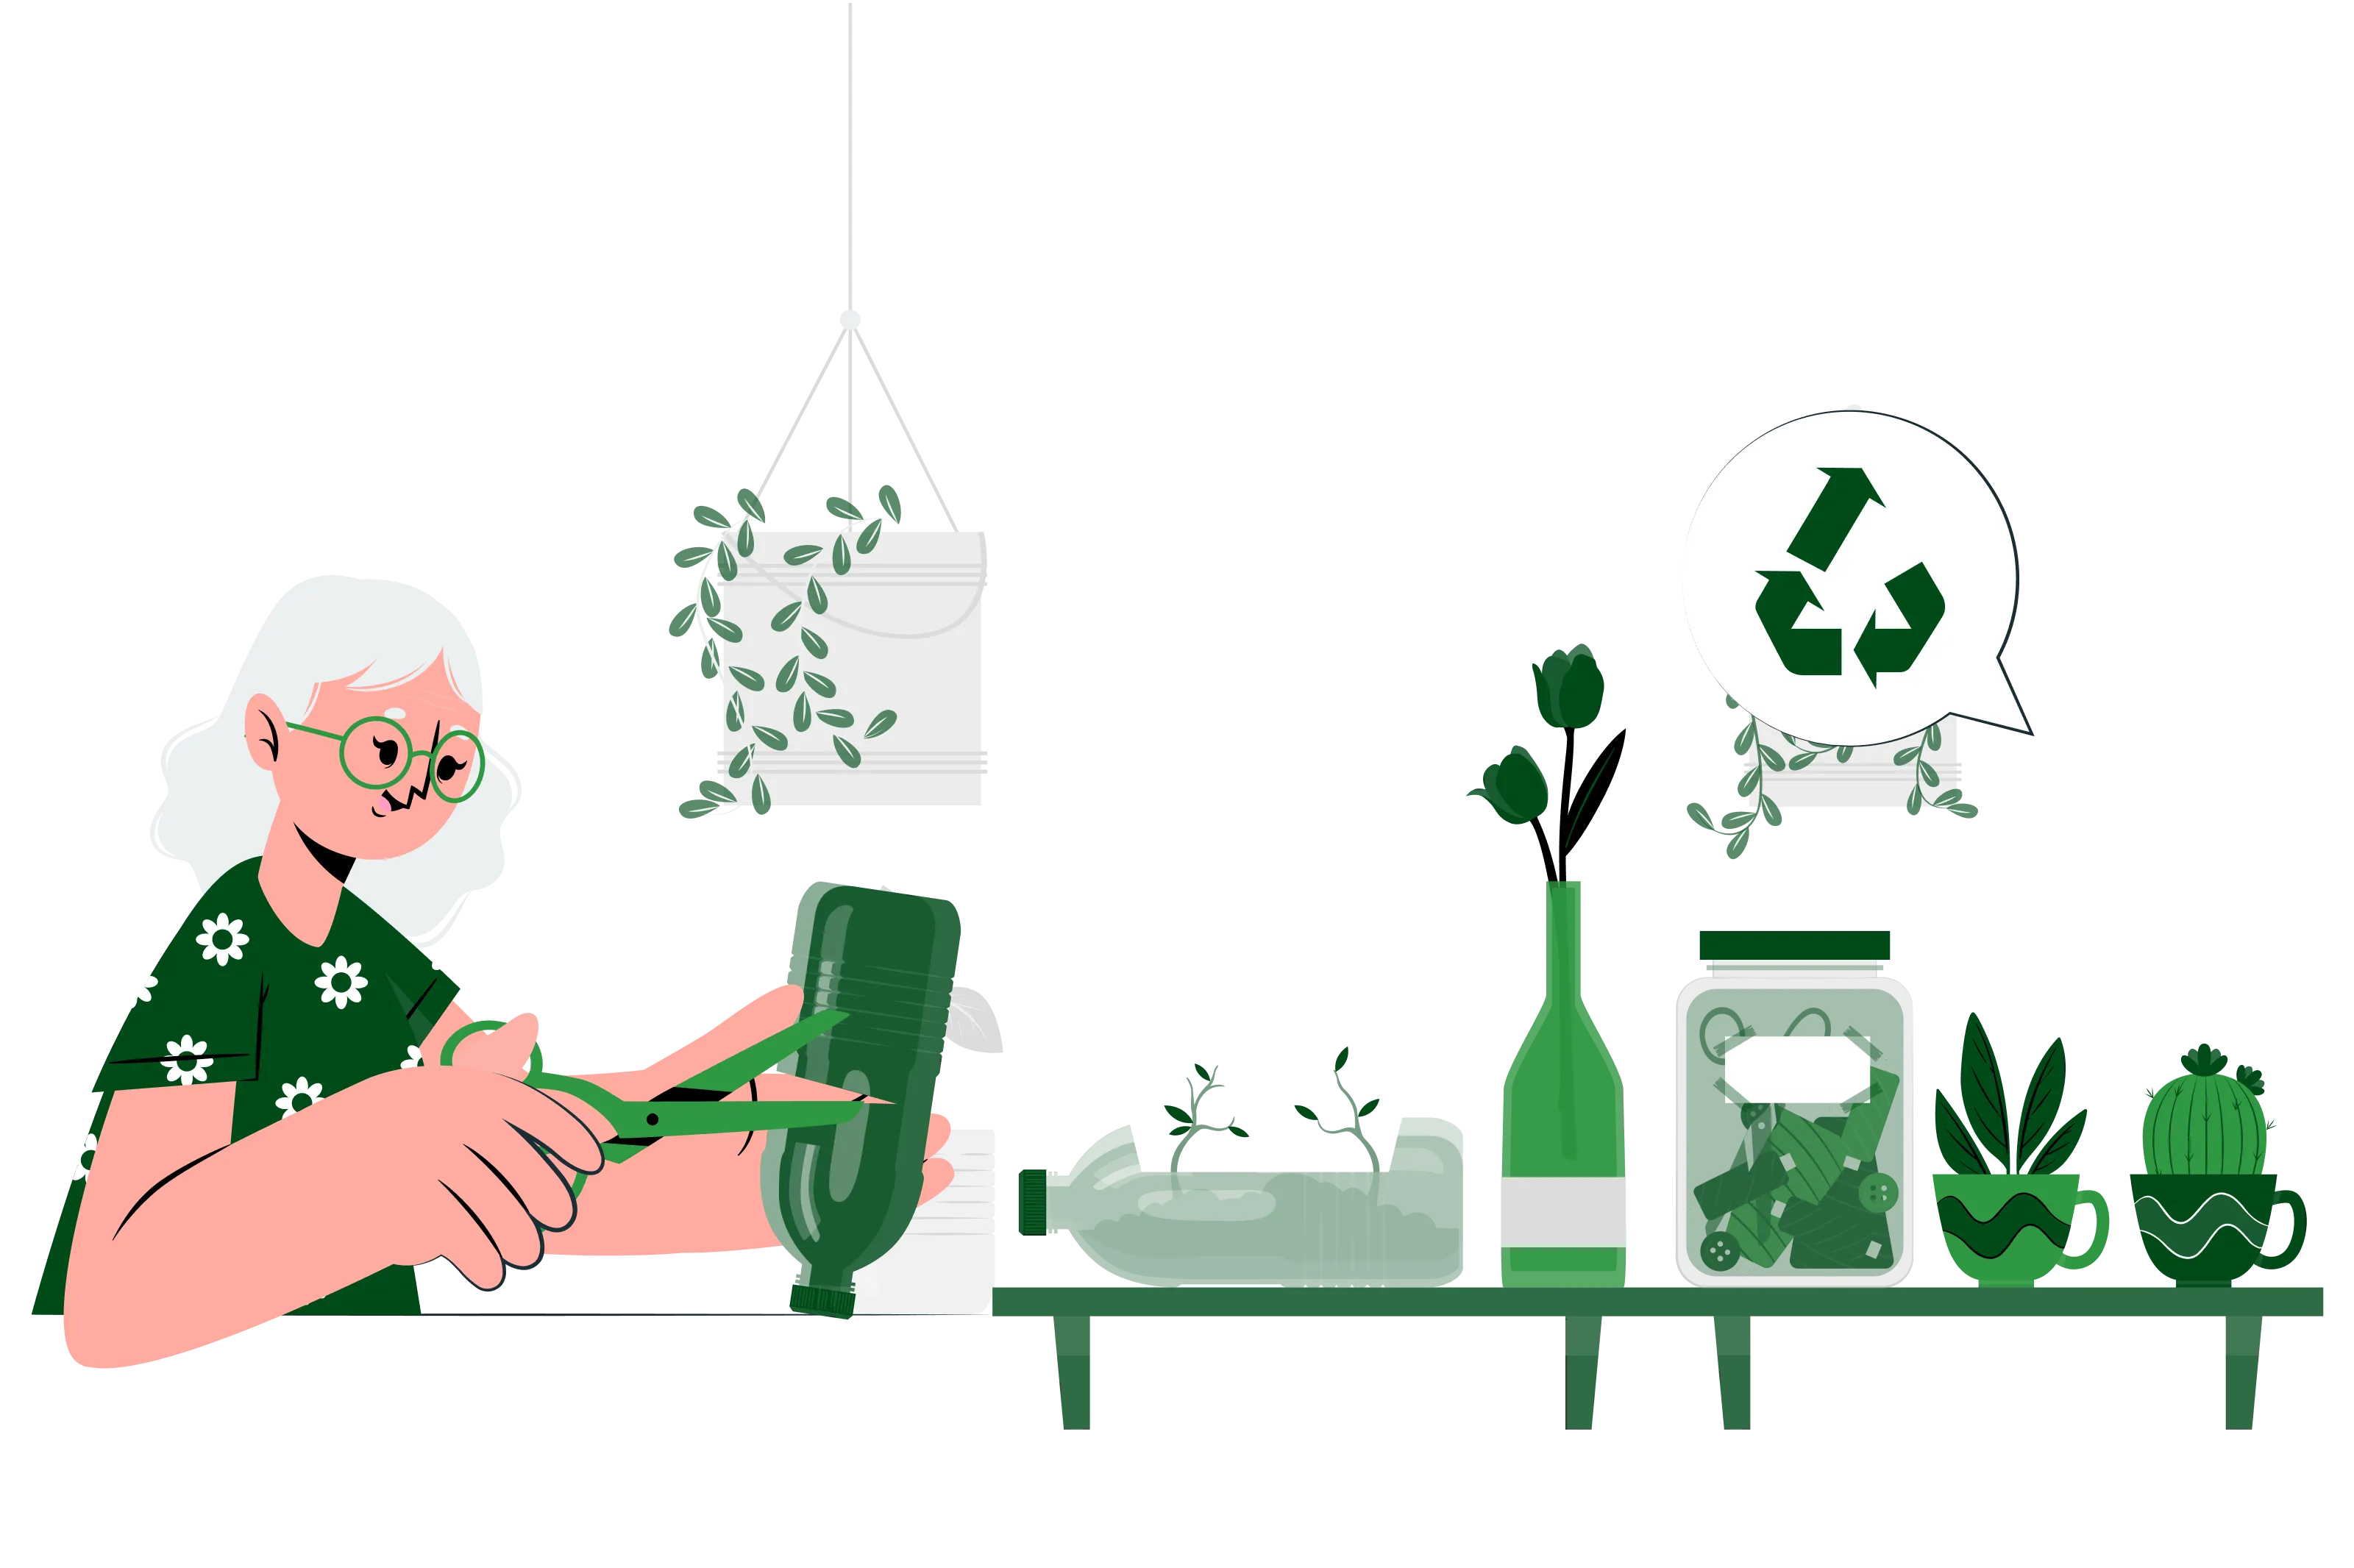 An image illustrating the art of reuse as a sustainable solution to reducing emissions. The visual shows a person holding an item that has been creatively repurposed, such as a bottle turned into a planter or a piece of fabric turned into a bag. The image highlights the concept of upcycling as a way to reduce waste and emissions by extending the life of existing materials and reducing the need for new production. The image suggests that through creativity and innovation, we can find sustainable solutions to reduce emissions and protect the environment.